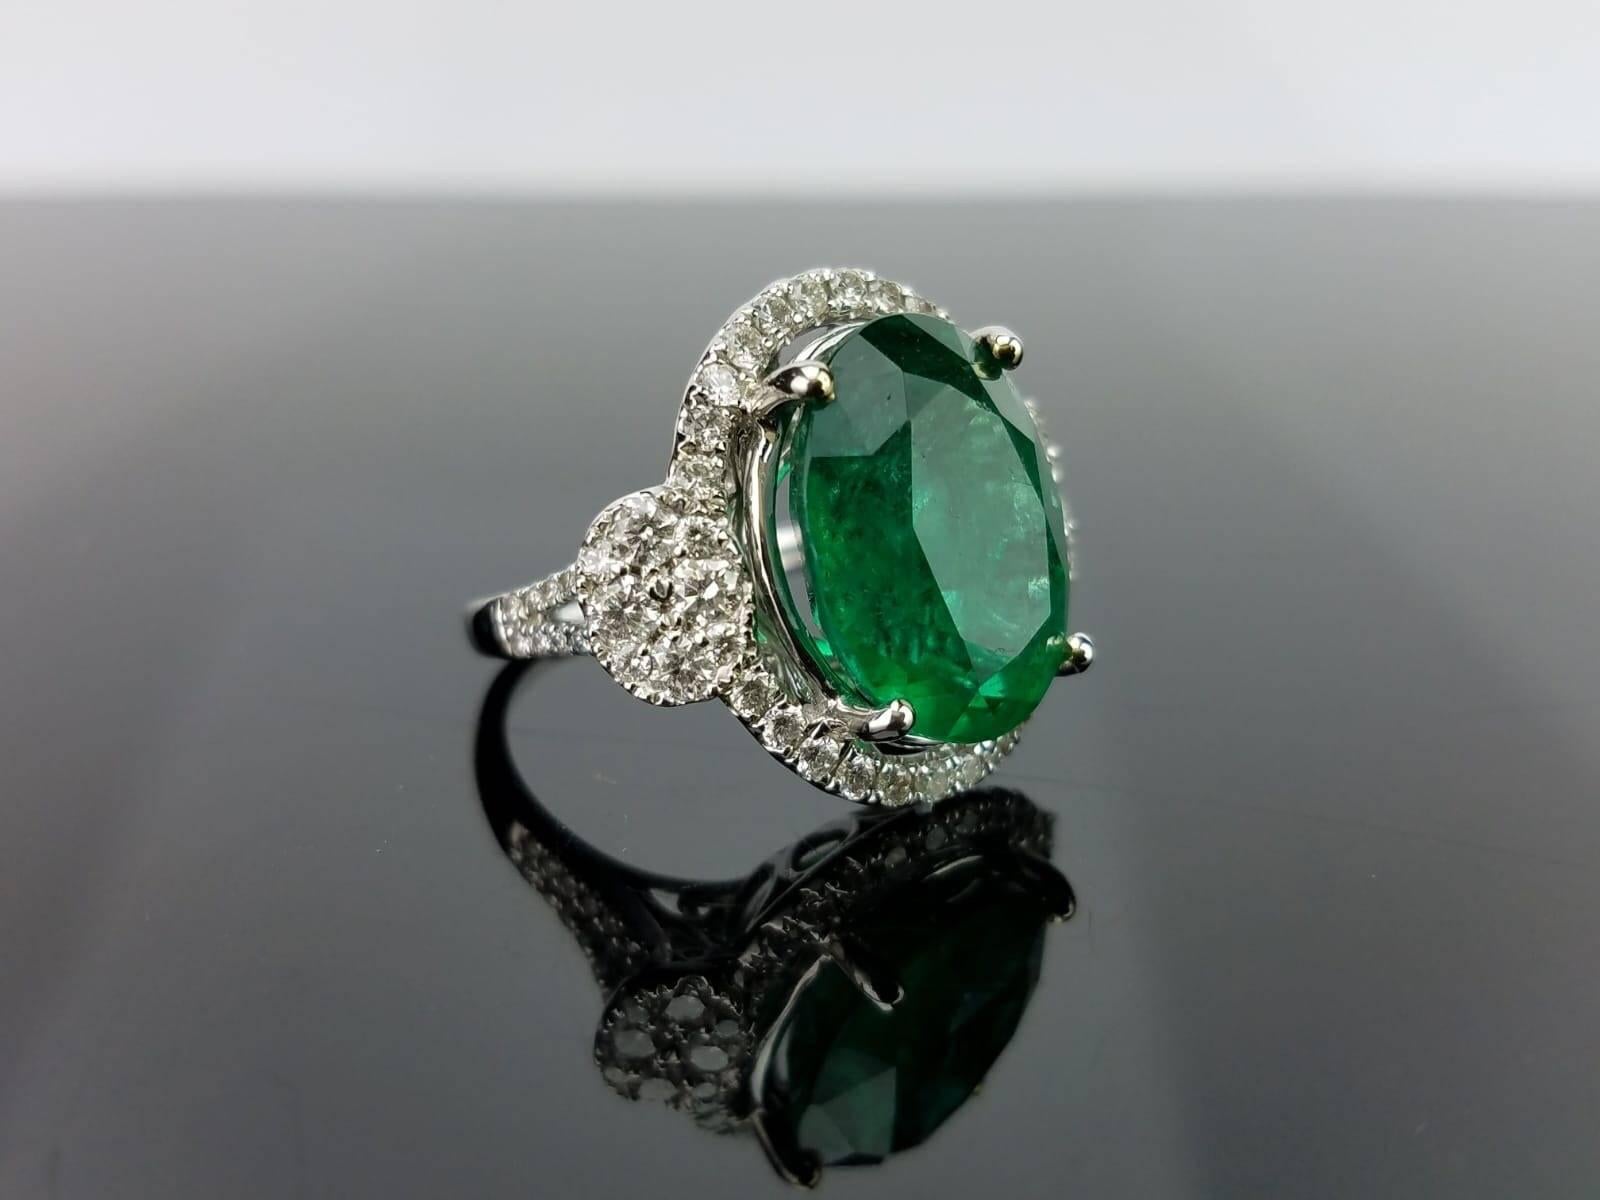 A custom-made art-deco looking, statement oval shaped Zambian Emerald cocktail ring, set with white Diamonds in 18k white Gold! 